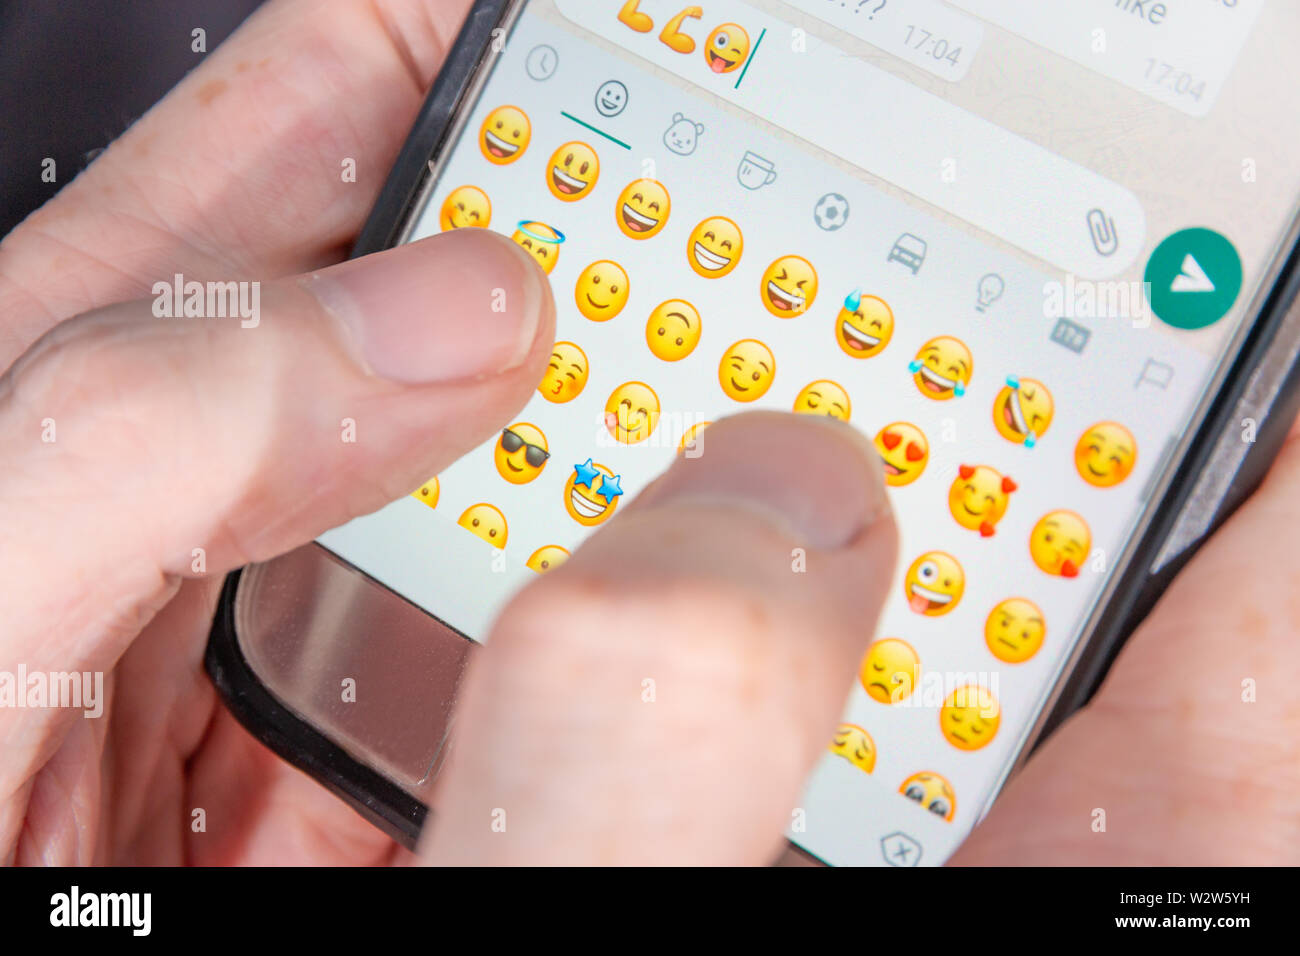 A person typing emoji characters into a chat app Stock Photo